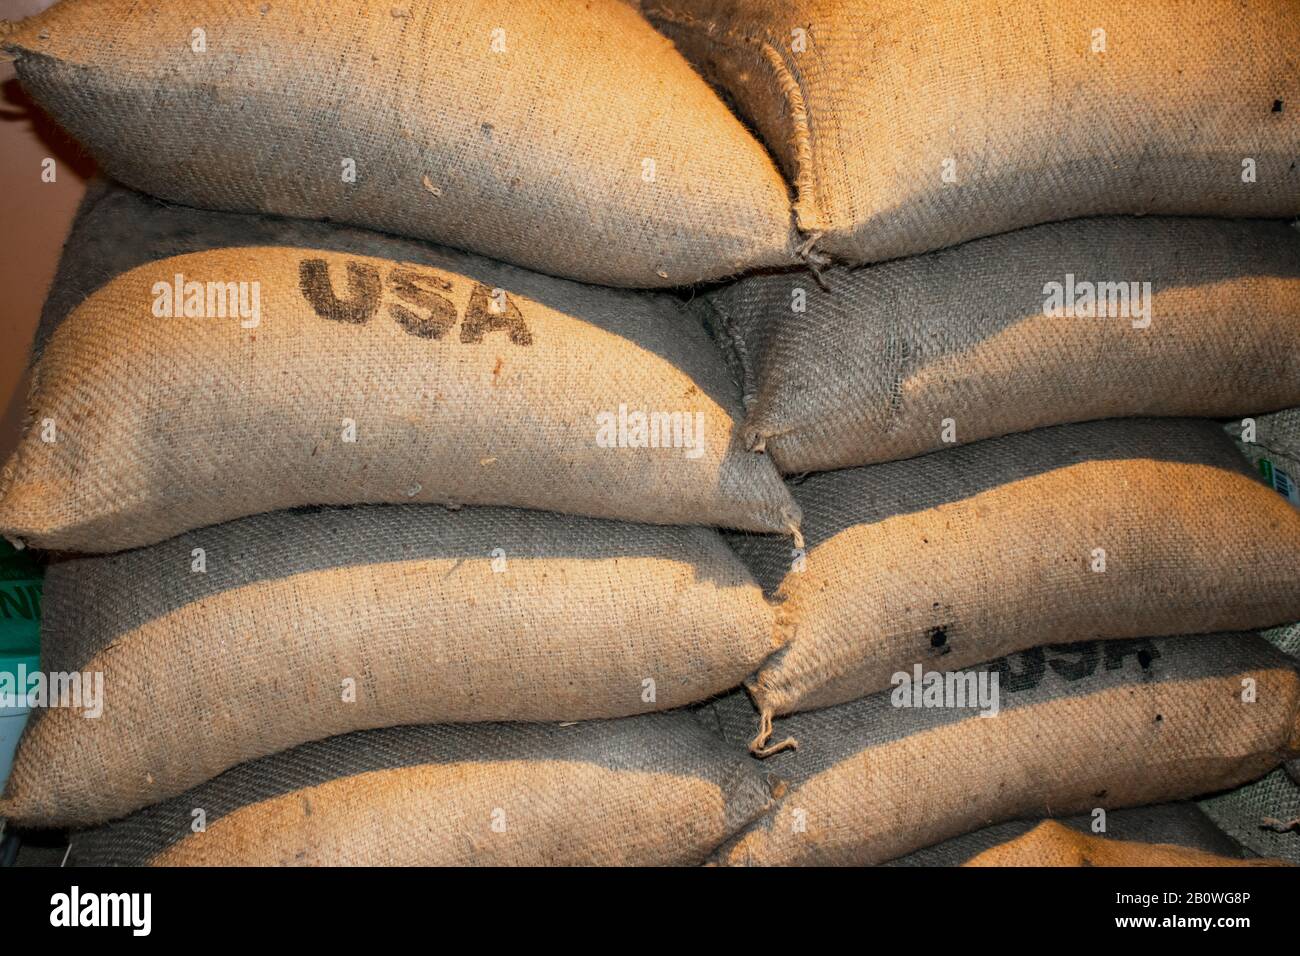 Stacked full bags of coffee closeup with USA stamped on some of them Stock Photo